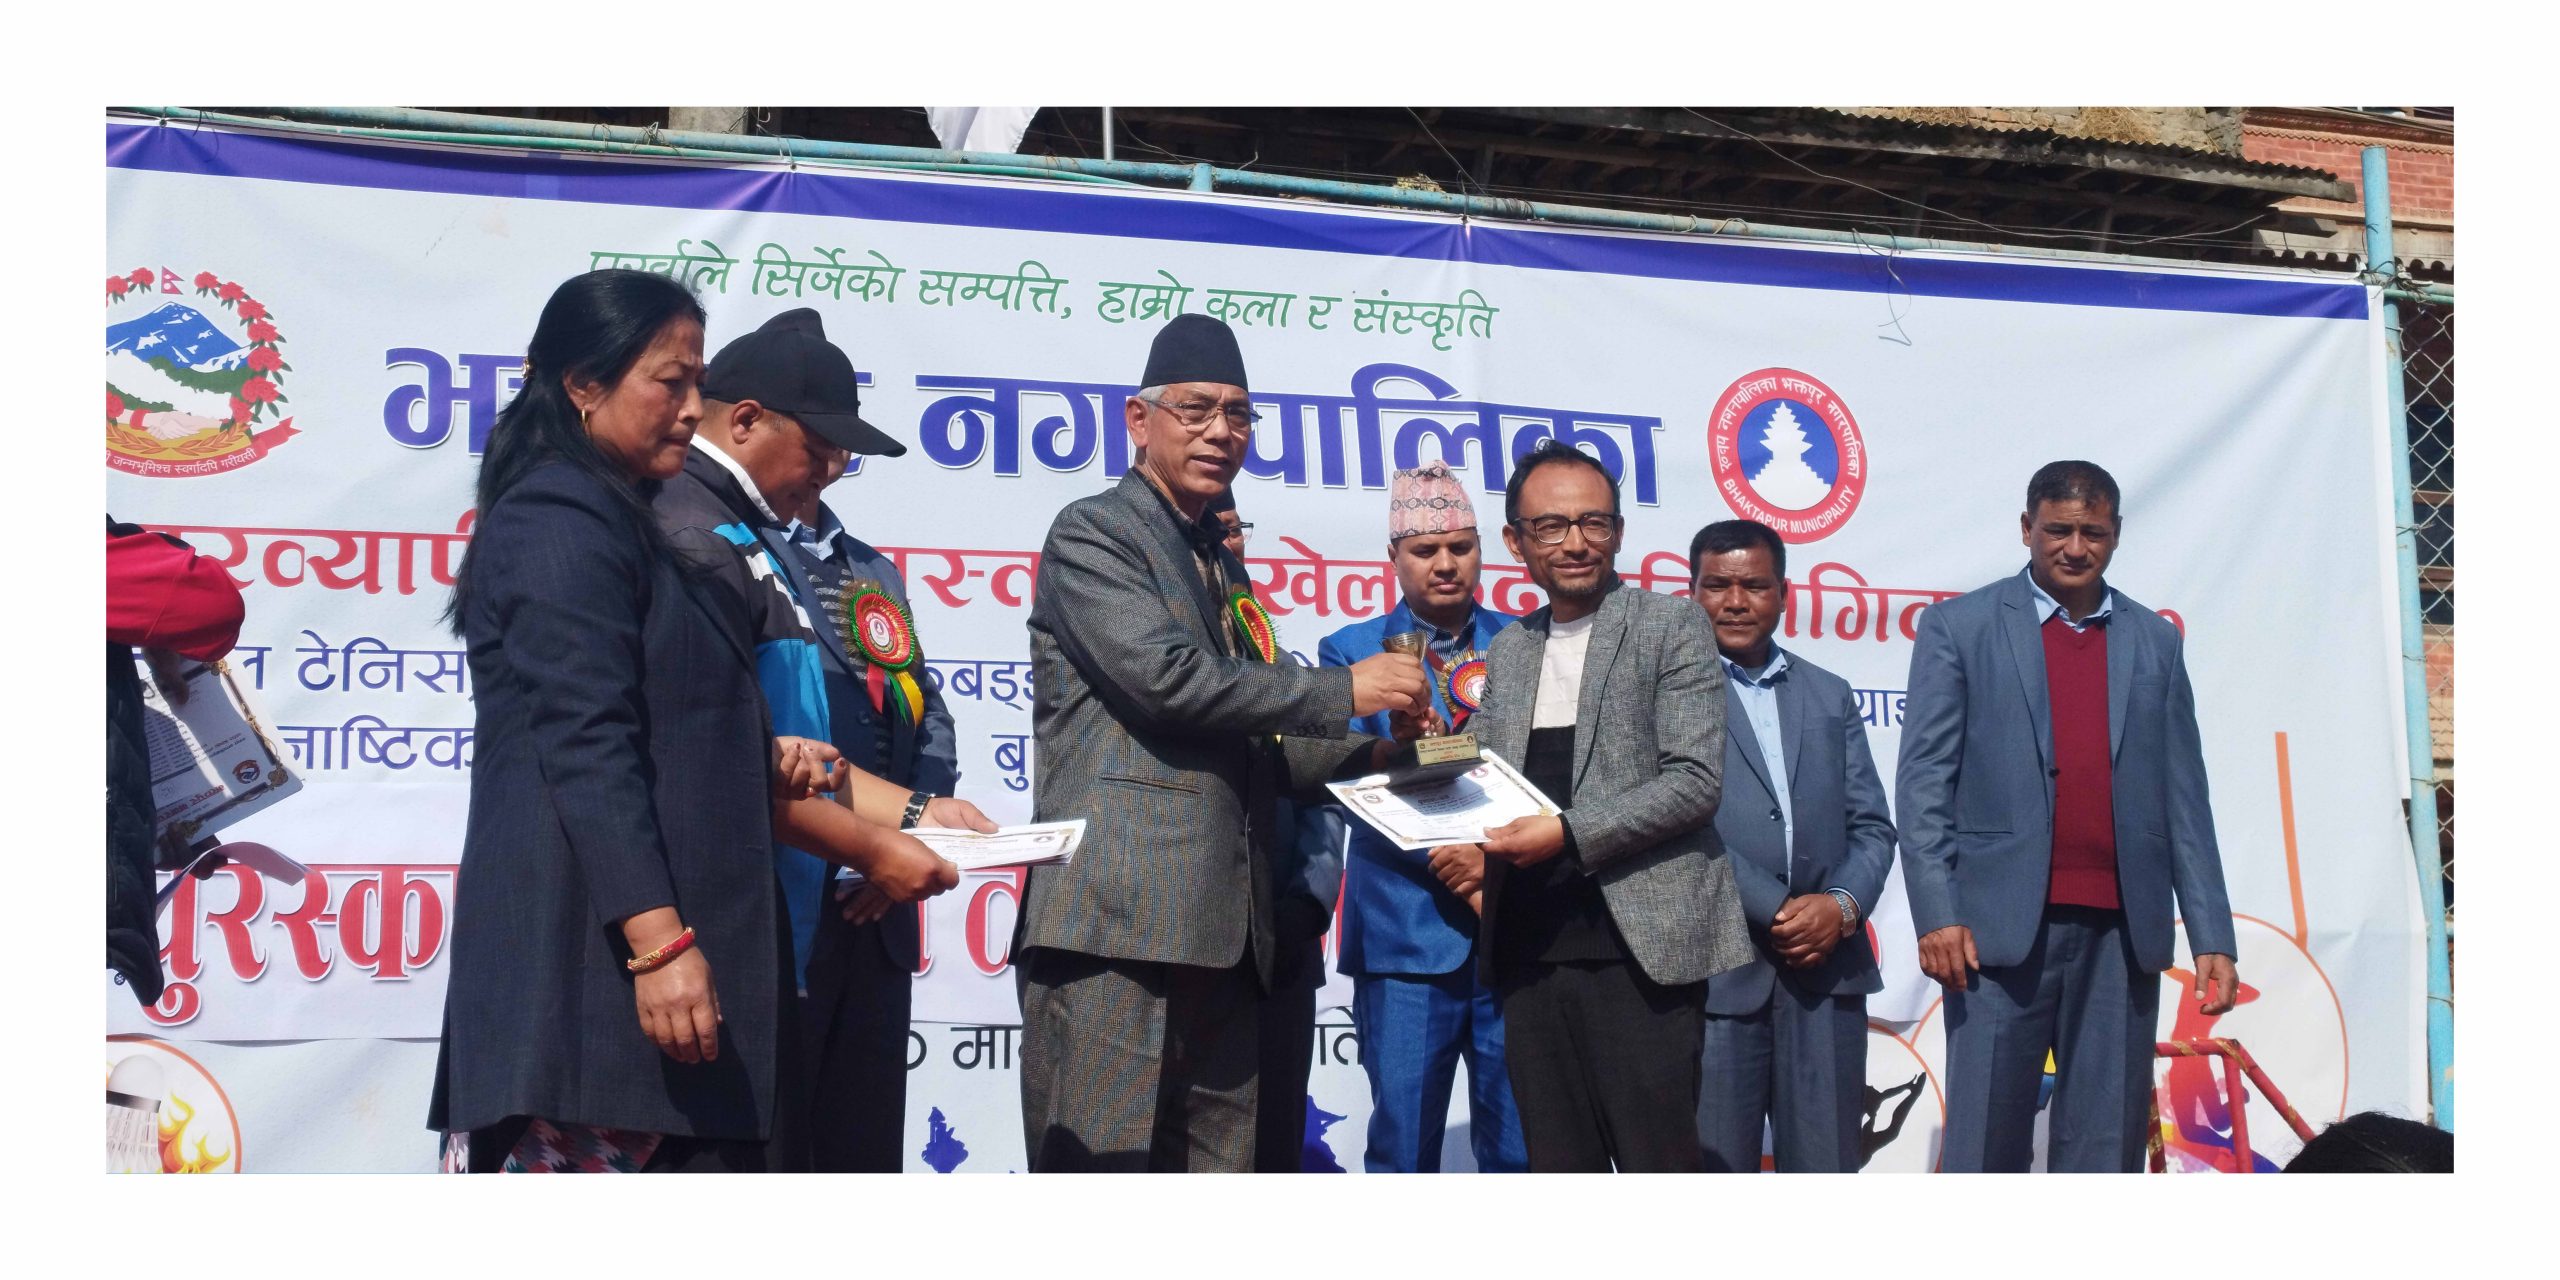 Mr. Prem Suwal ( Member of Bagmati Provience Assembly ) present the Prestigeous award to Oxford Practical School / college.